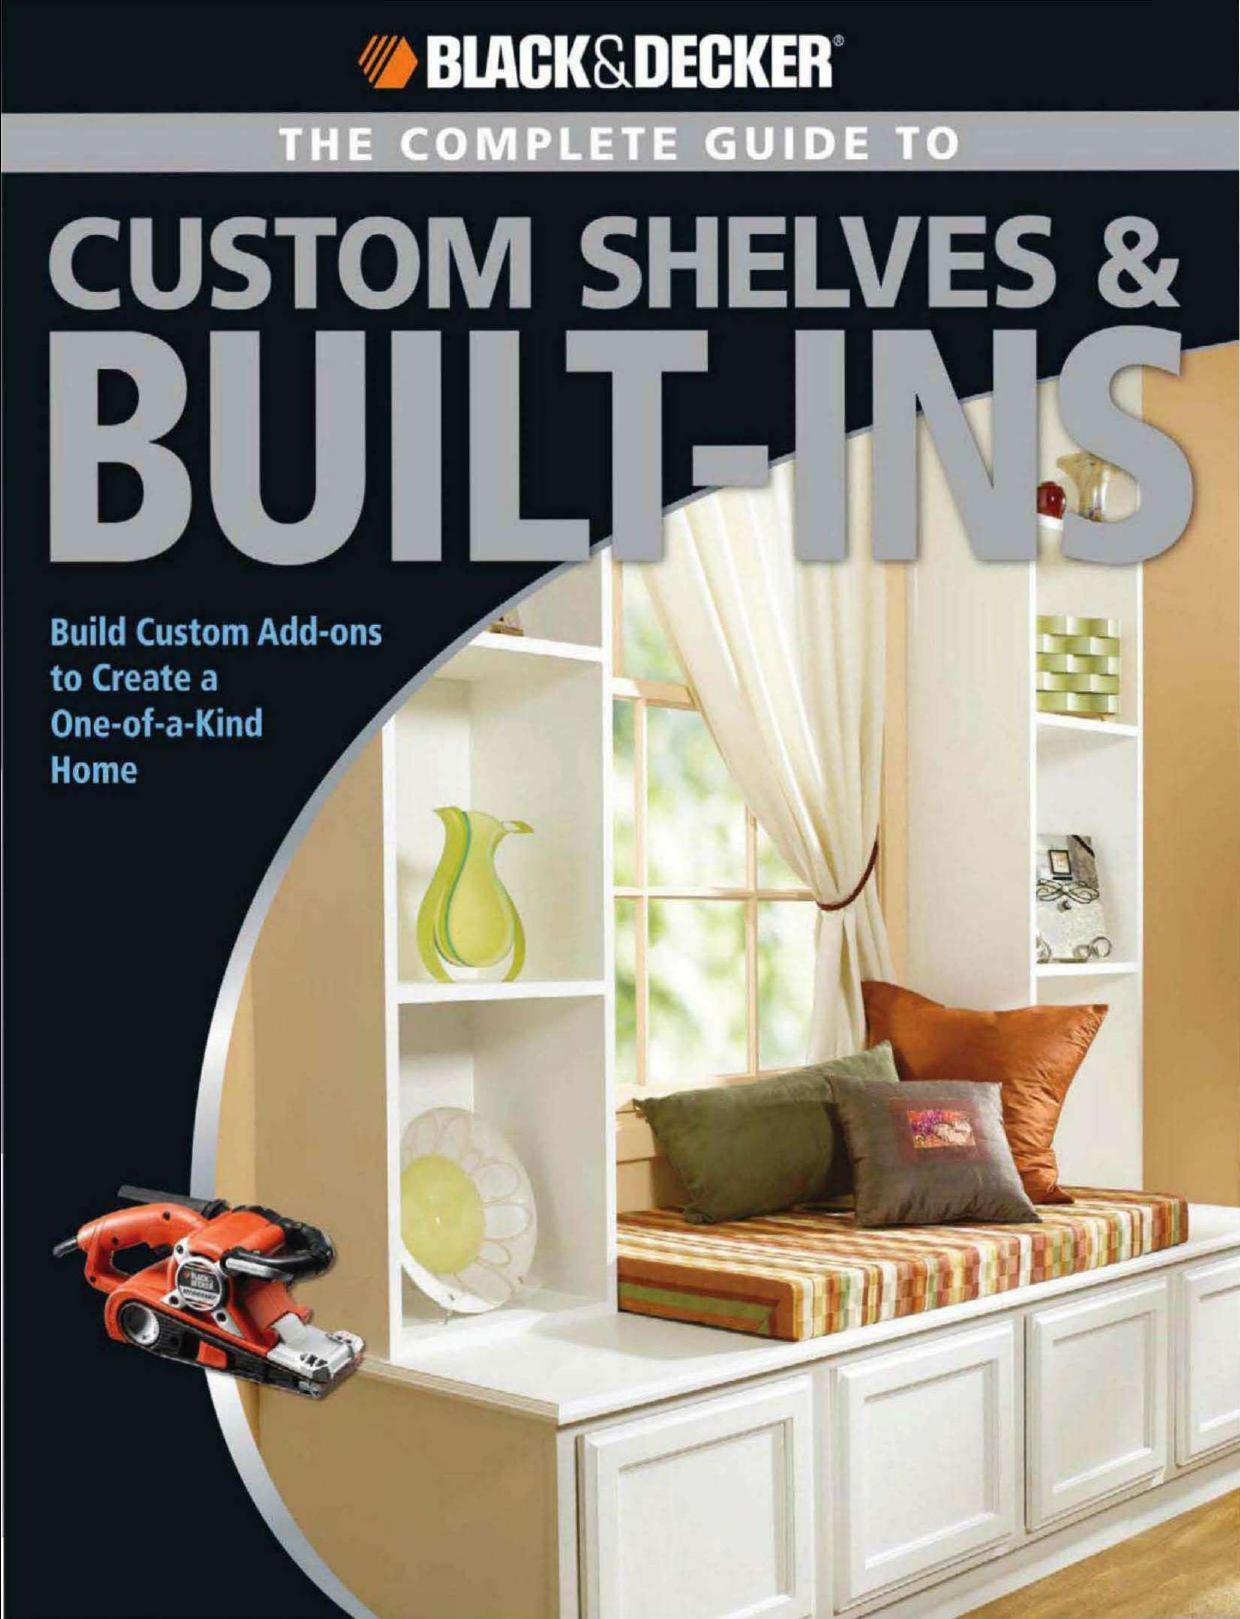 Black & Decker. The Complete Guide to Custom Shelves & Built-ins  Build Custom Add-ons to Create a One-of-a-kind Home ( PDFDrive.com )